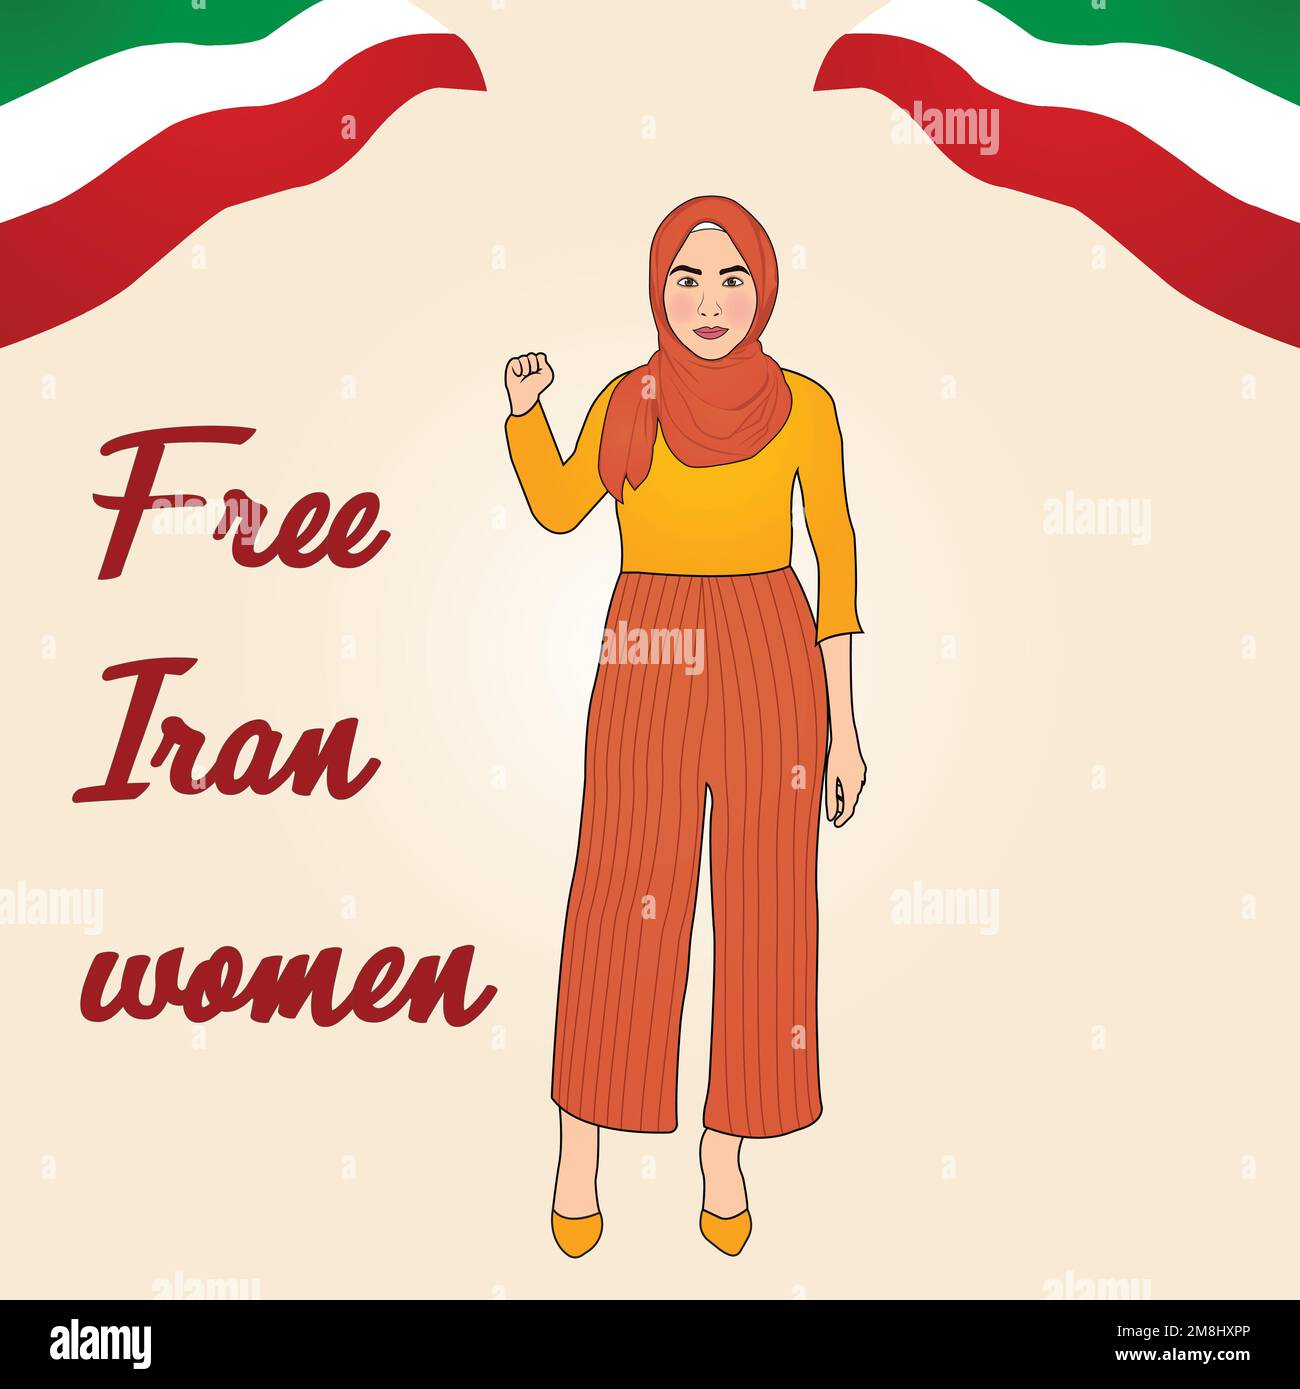 Iranian woman protesting for freedom Stock Vector